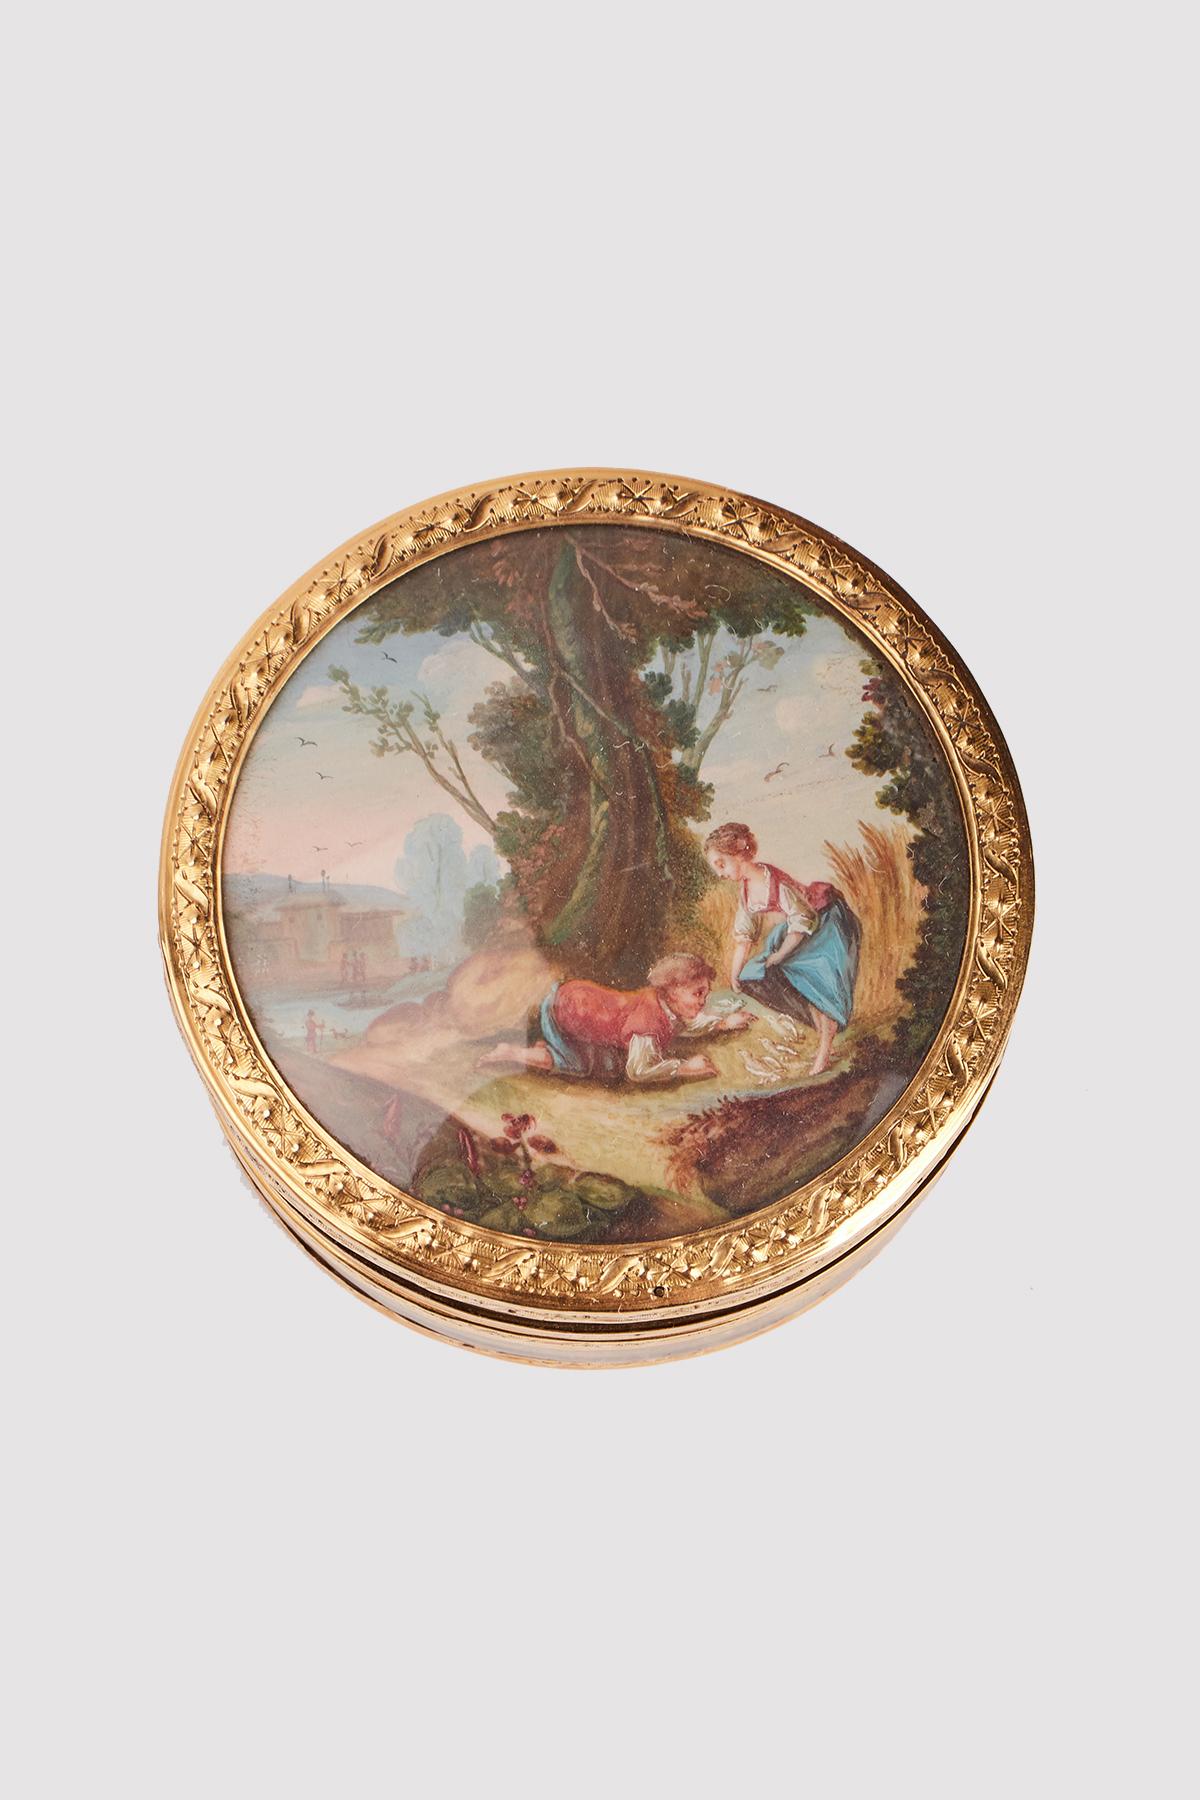 Round snuffbox 18 K gold, tortoiseshell and gouache technique depicting two childs and a landscape. France 1784. (SHIP TO EU ONLY)